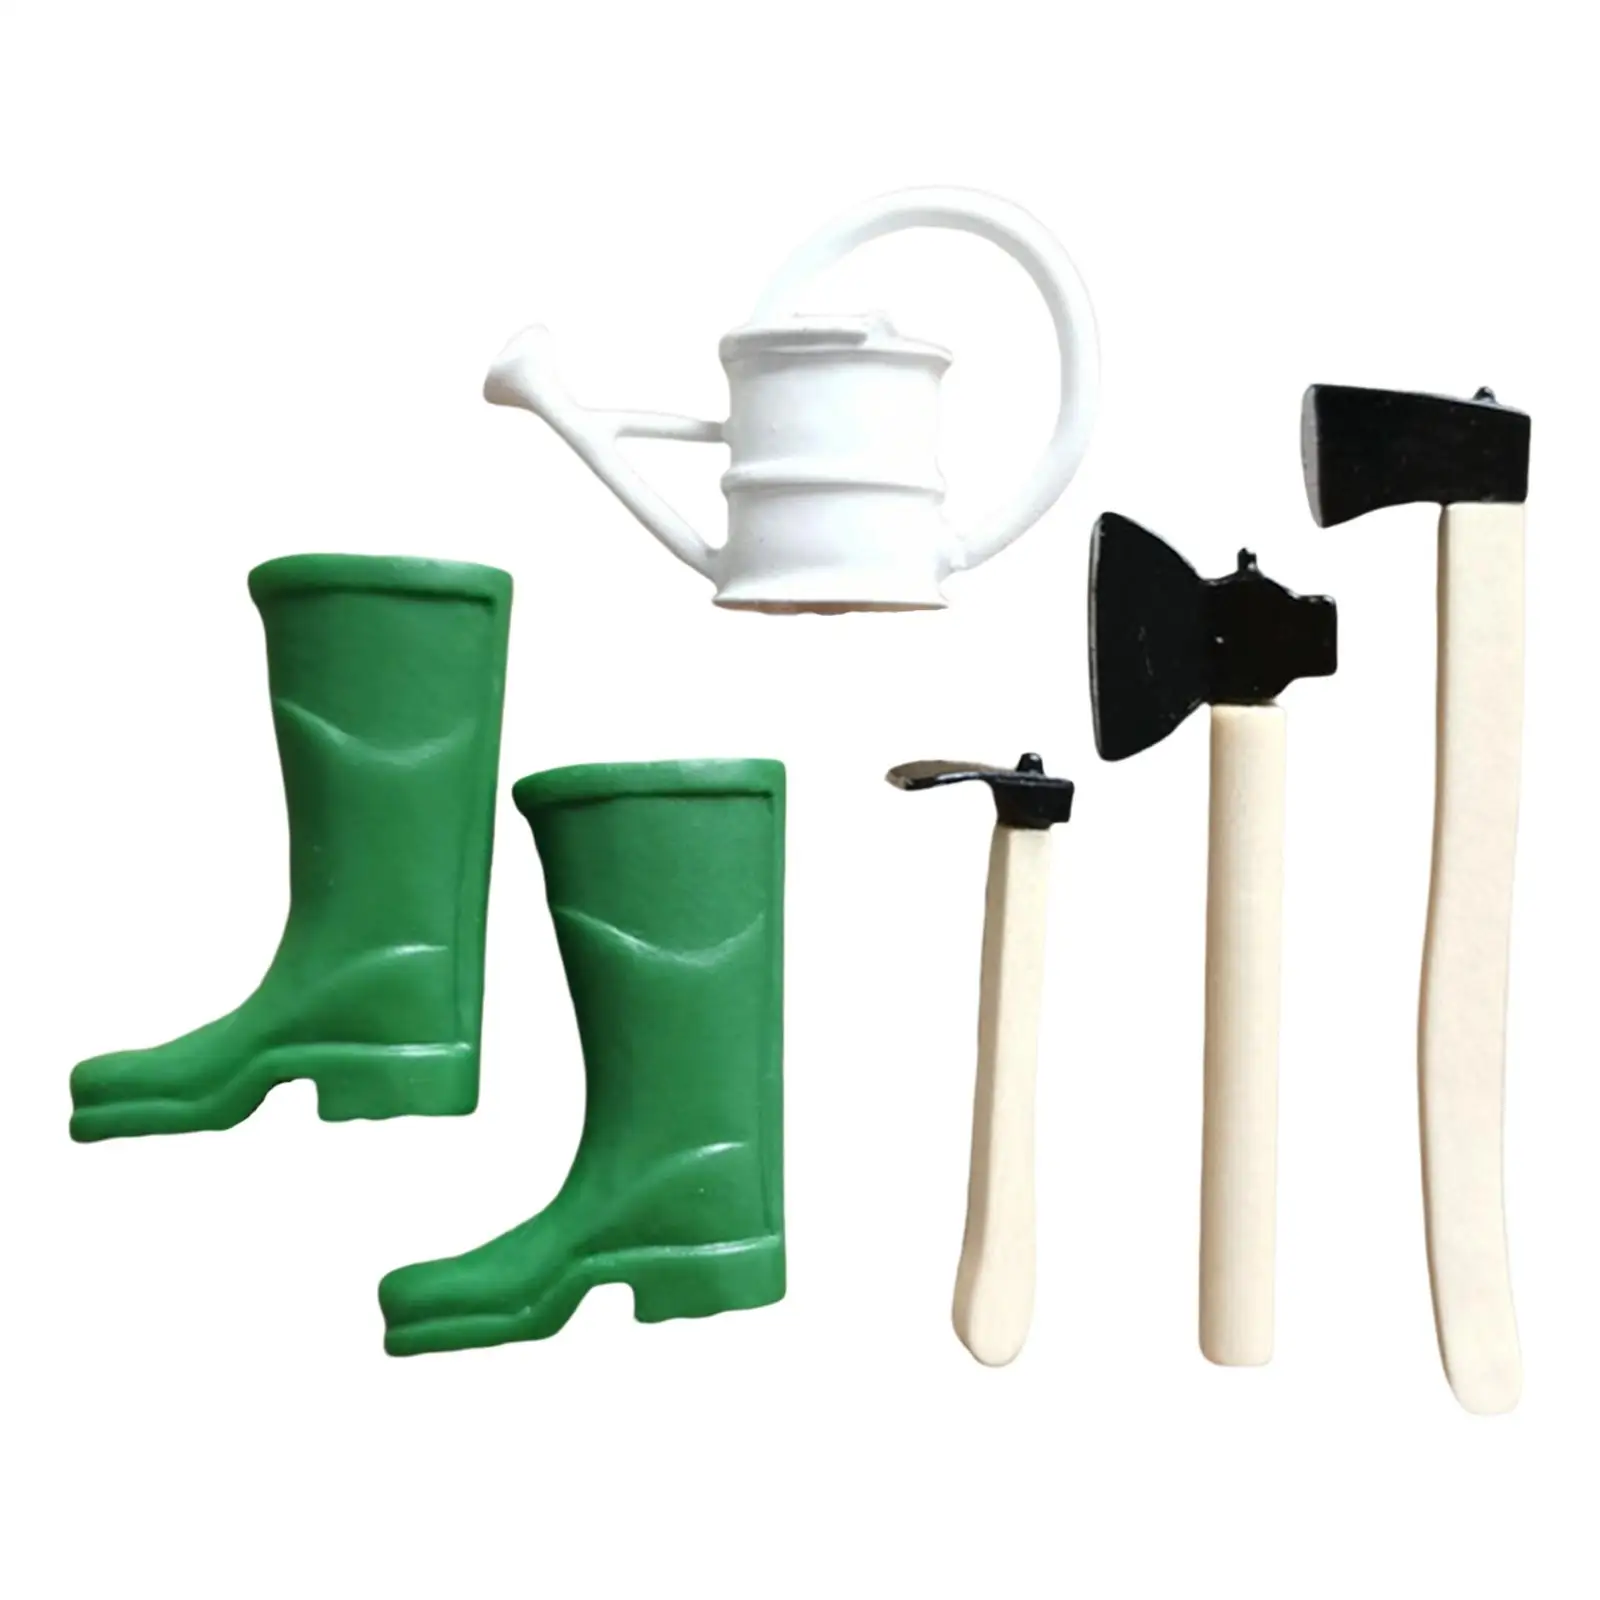 5 Pieces Wooden Handle Set Mini Rain Boot, Wartering Can for 1:12 Dollhouse